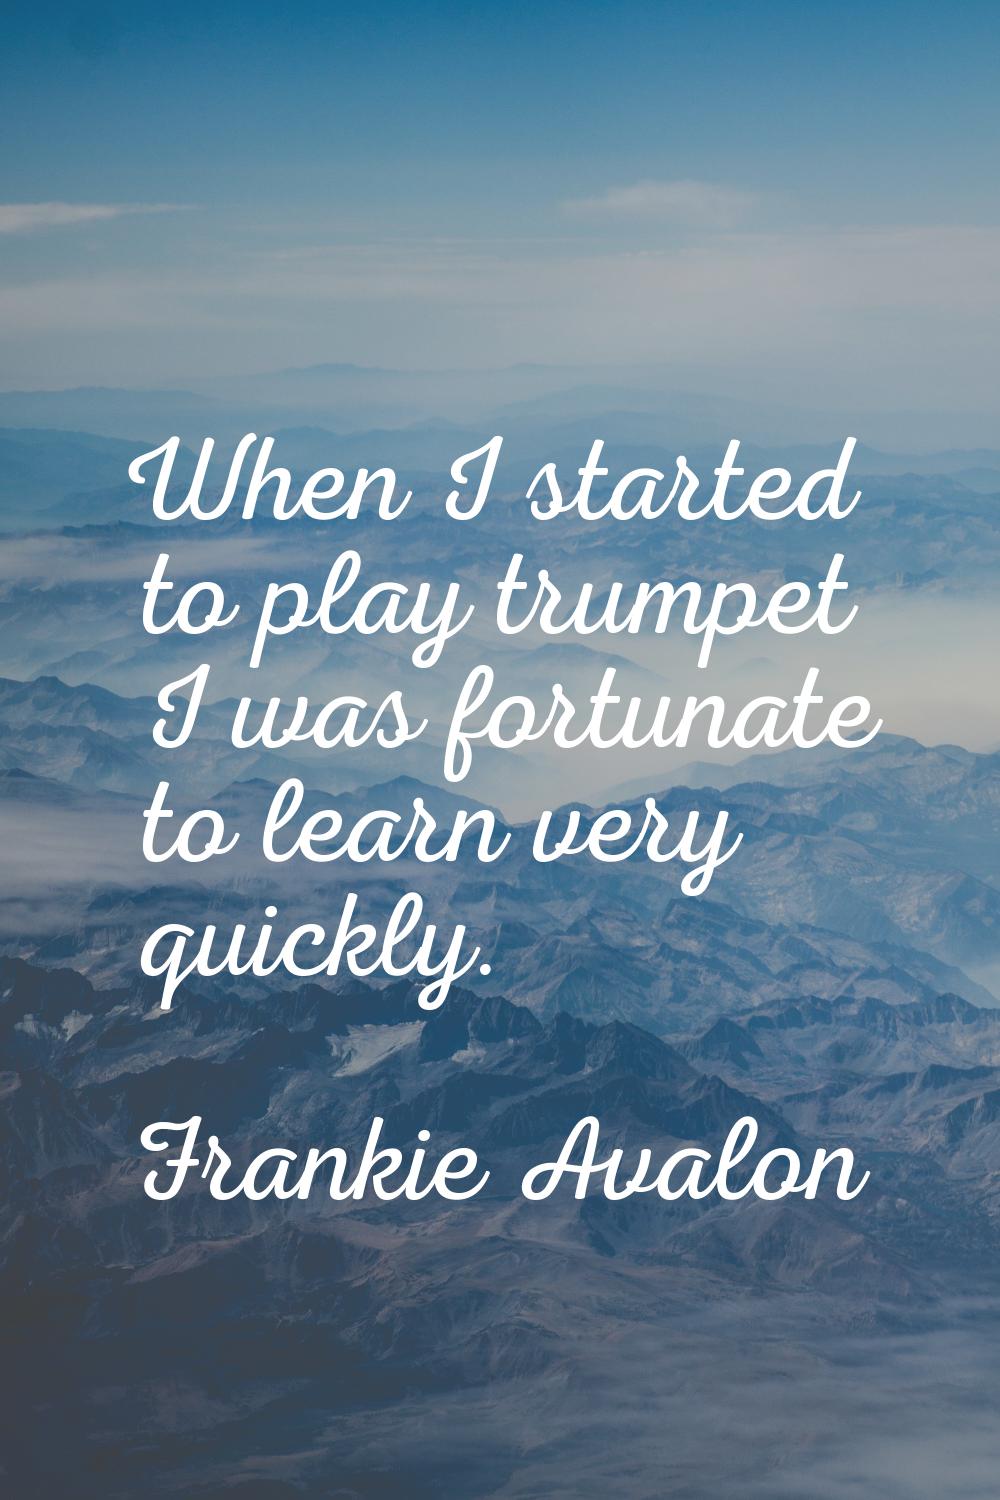 When I started to play trumpet I was fortunate to learn very quickly.